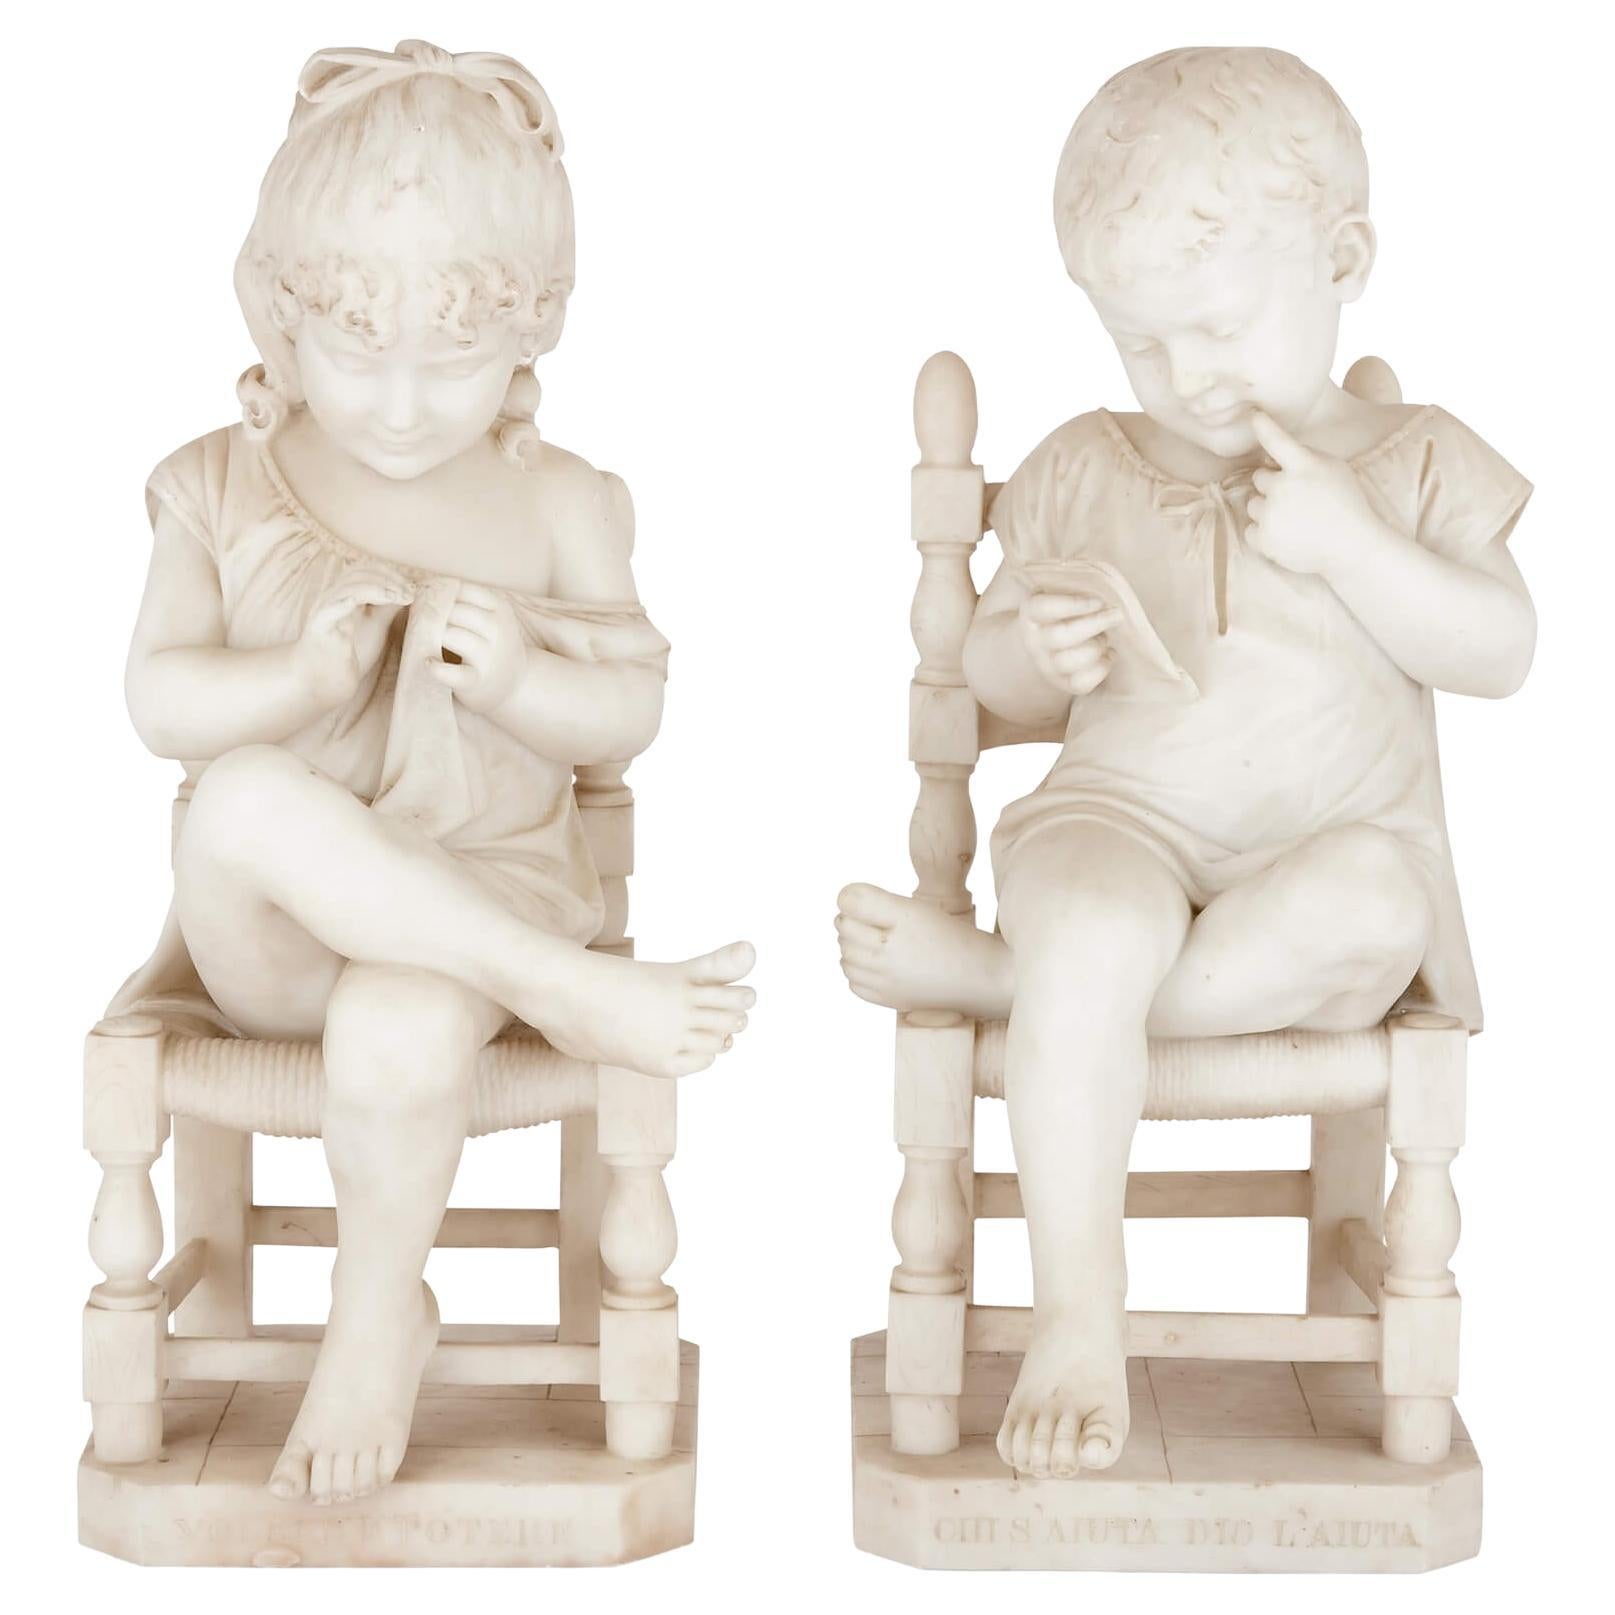 Very Rare Pair of Marble Sculptures of Seated Children by Cesare Lapini